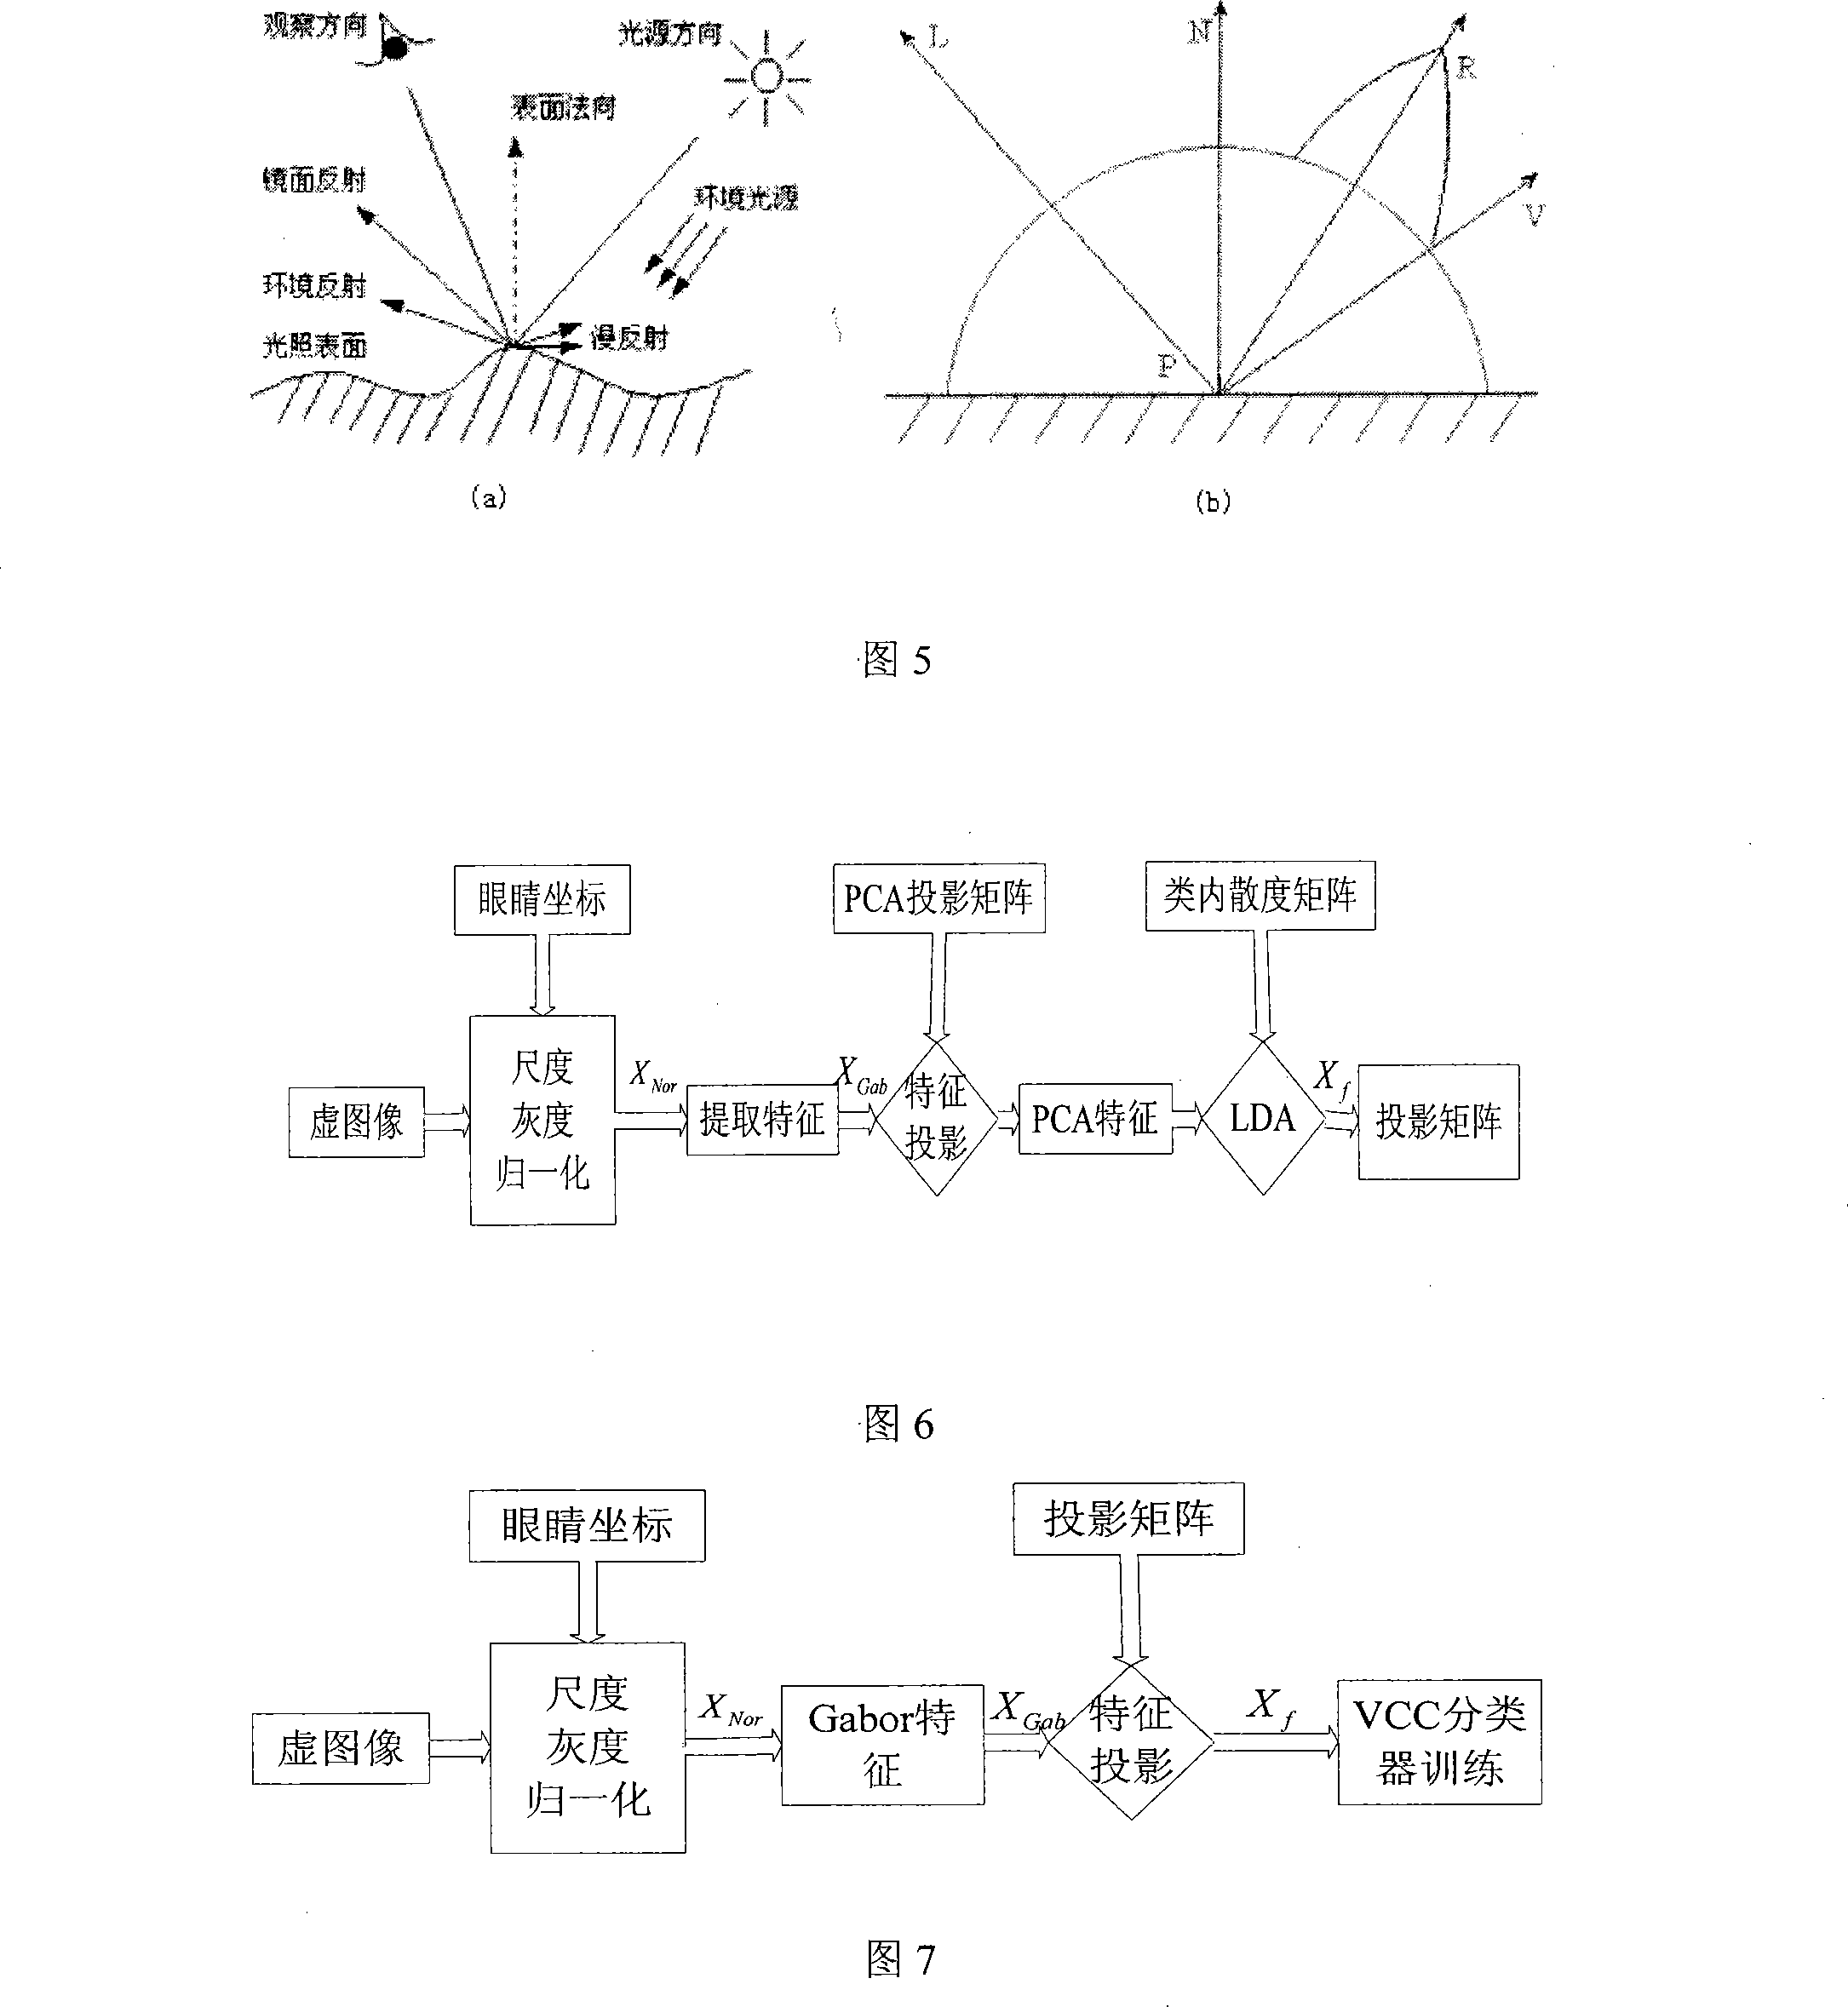 Two-dimension human face image recognizing method